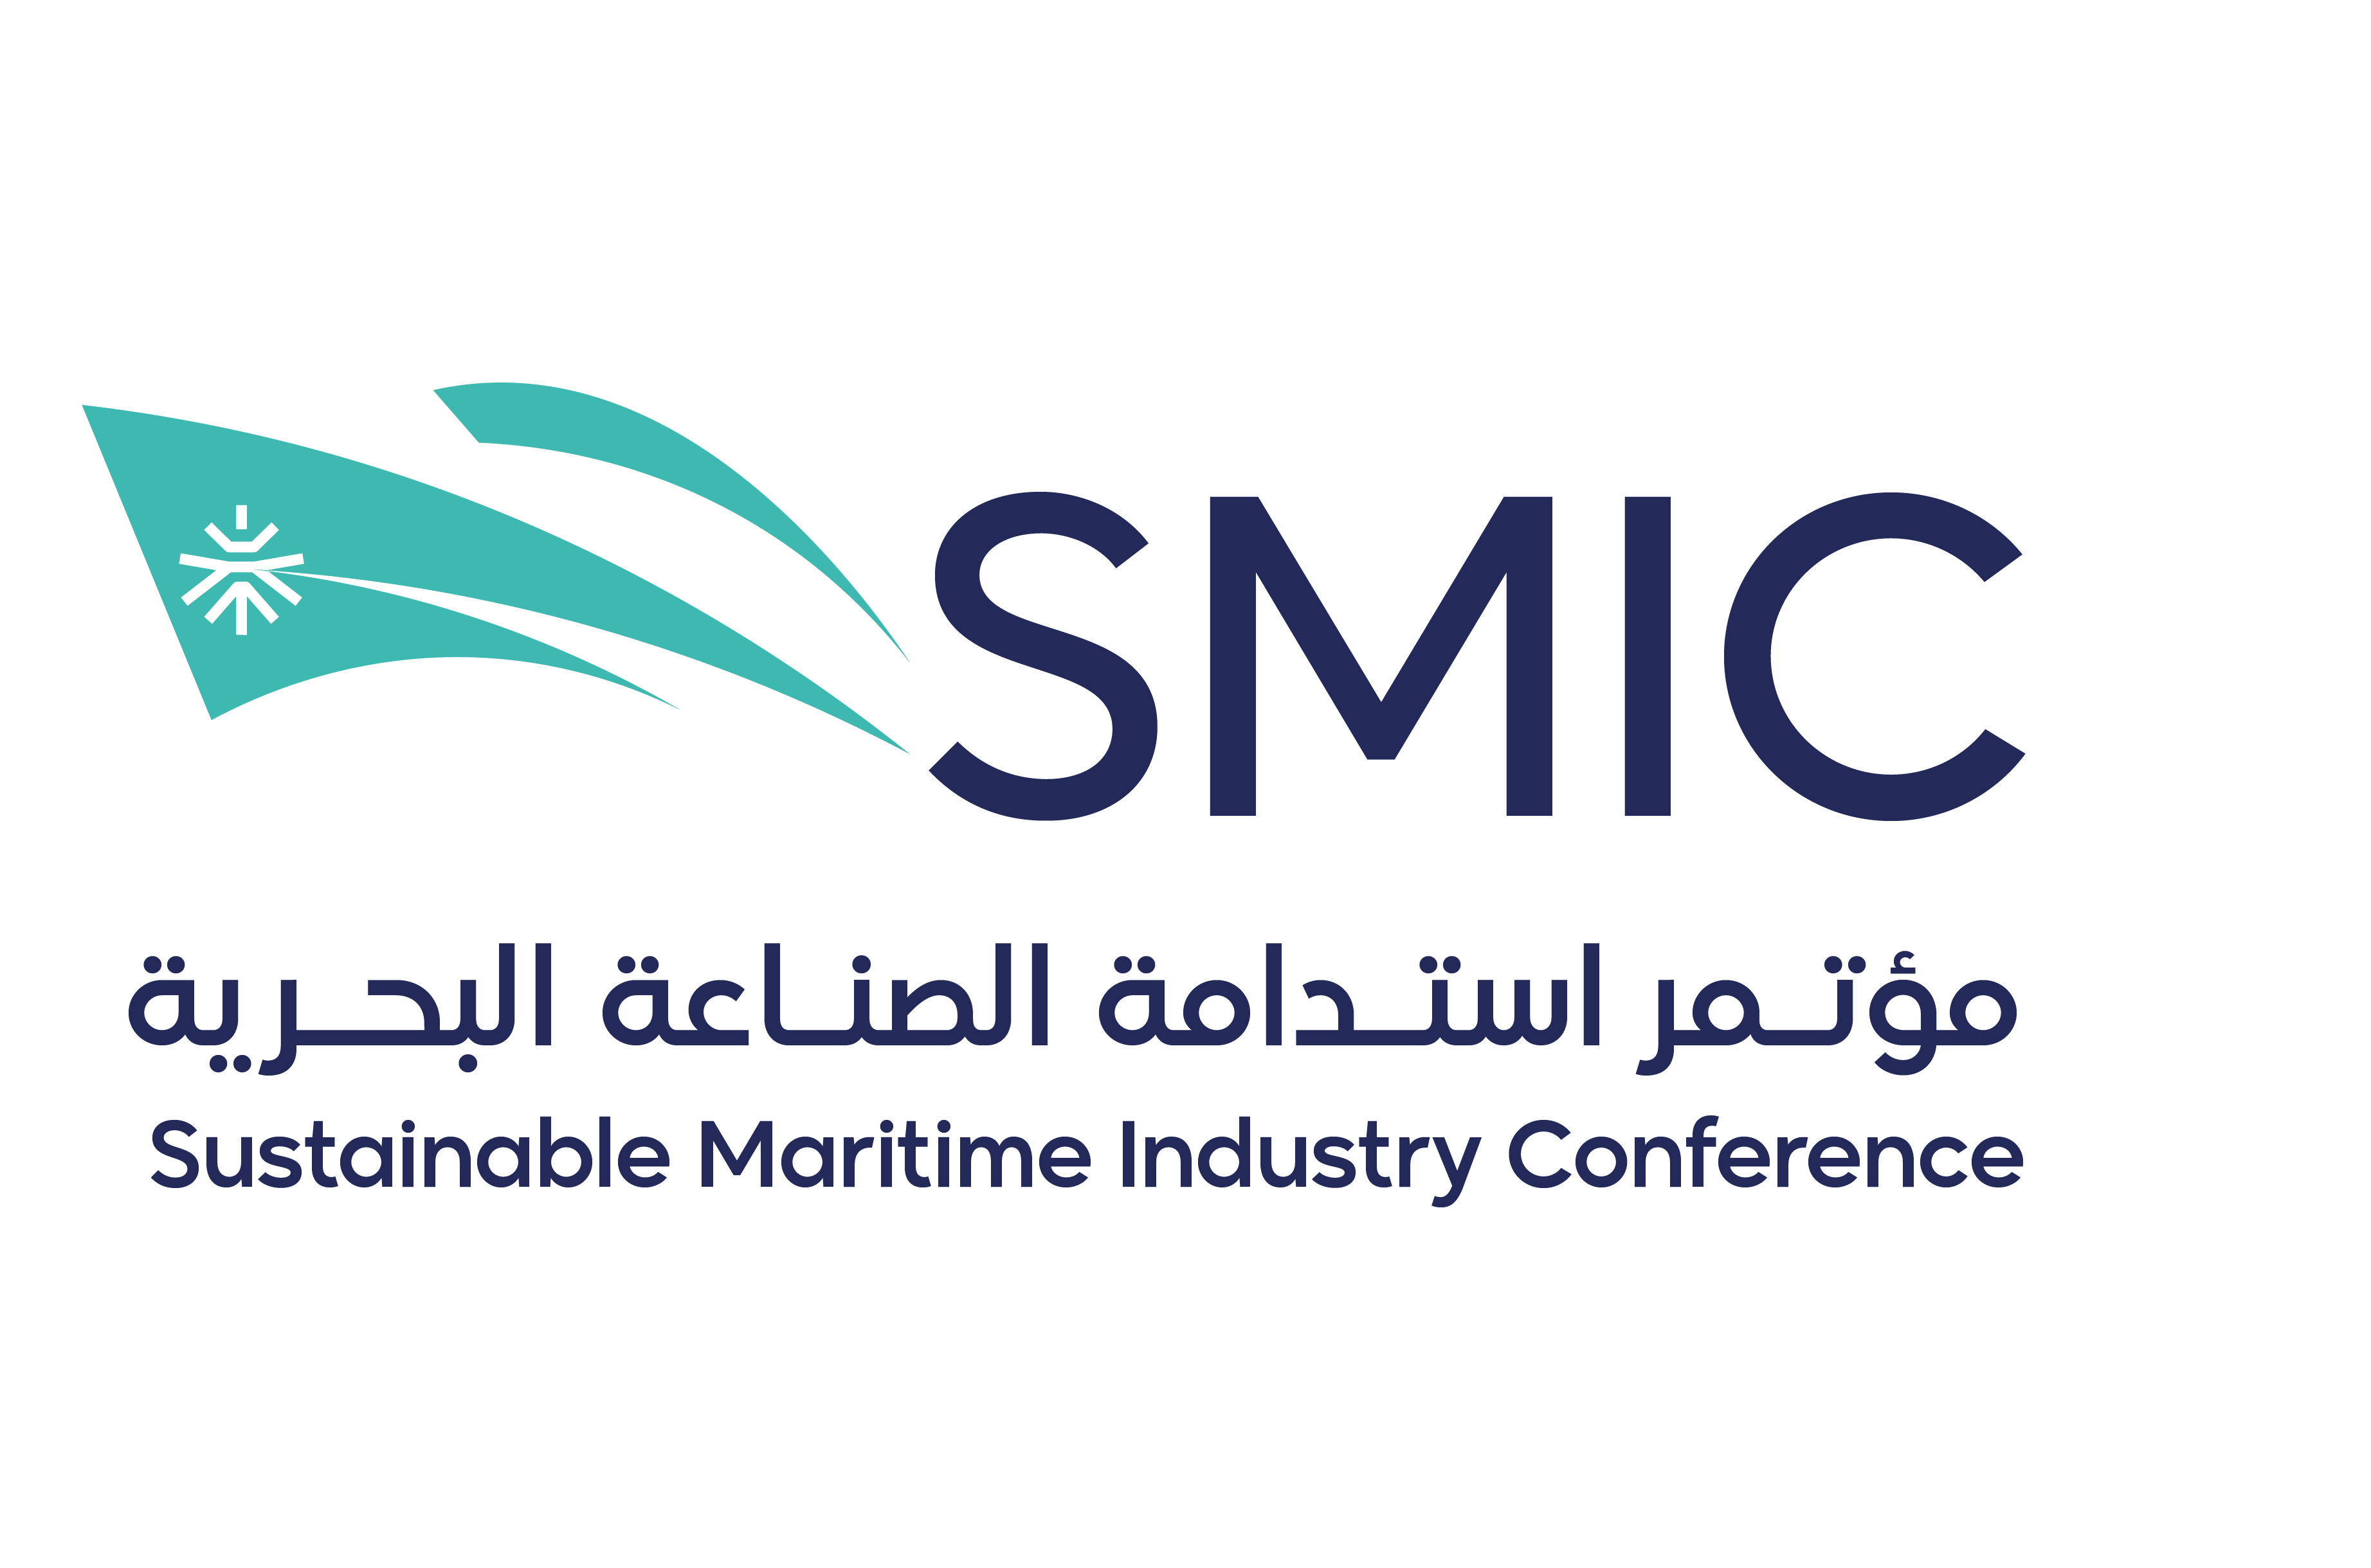 Sustainable Maritime Industry Conference